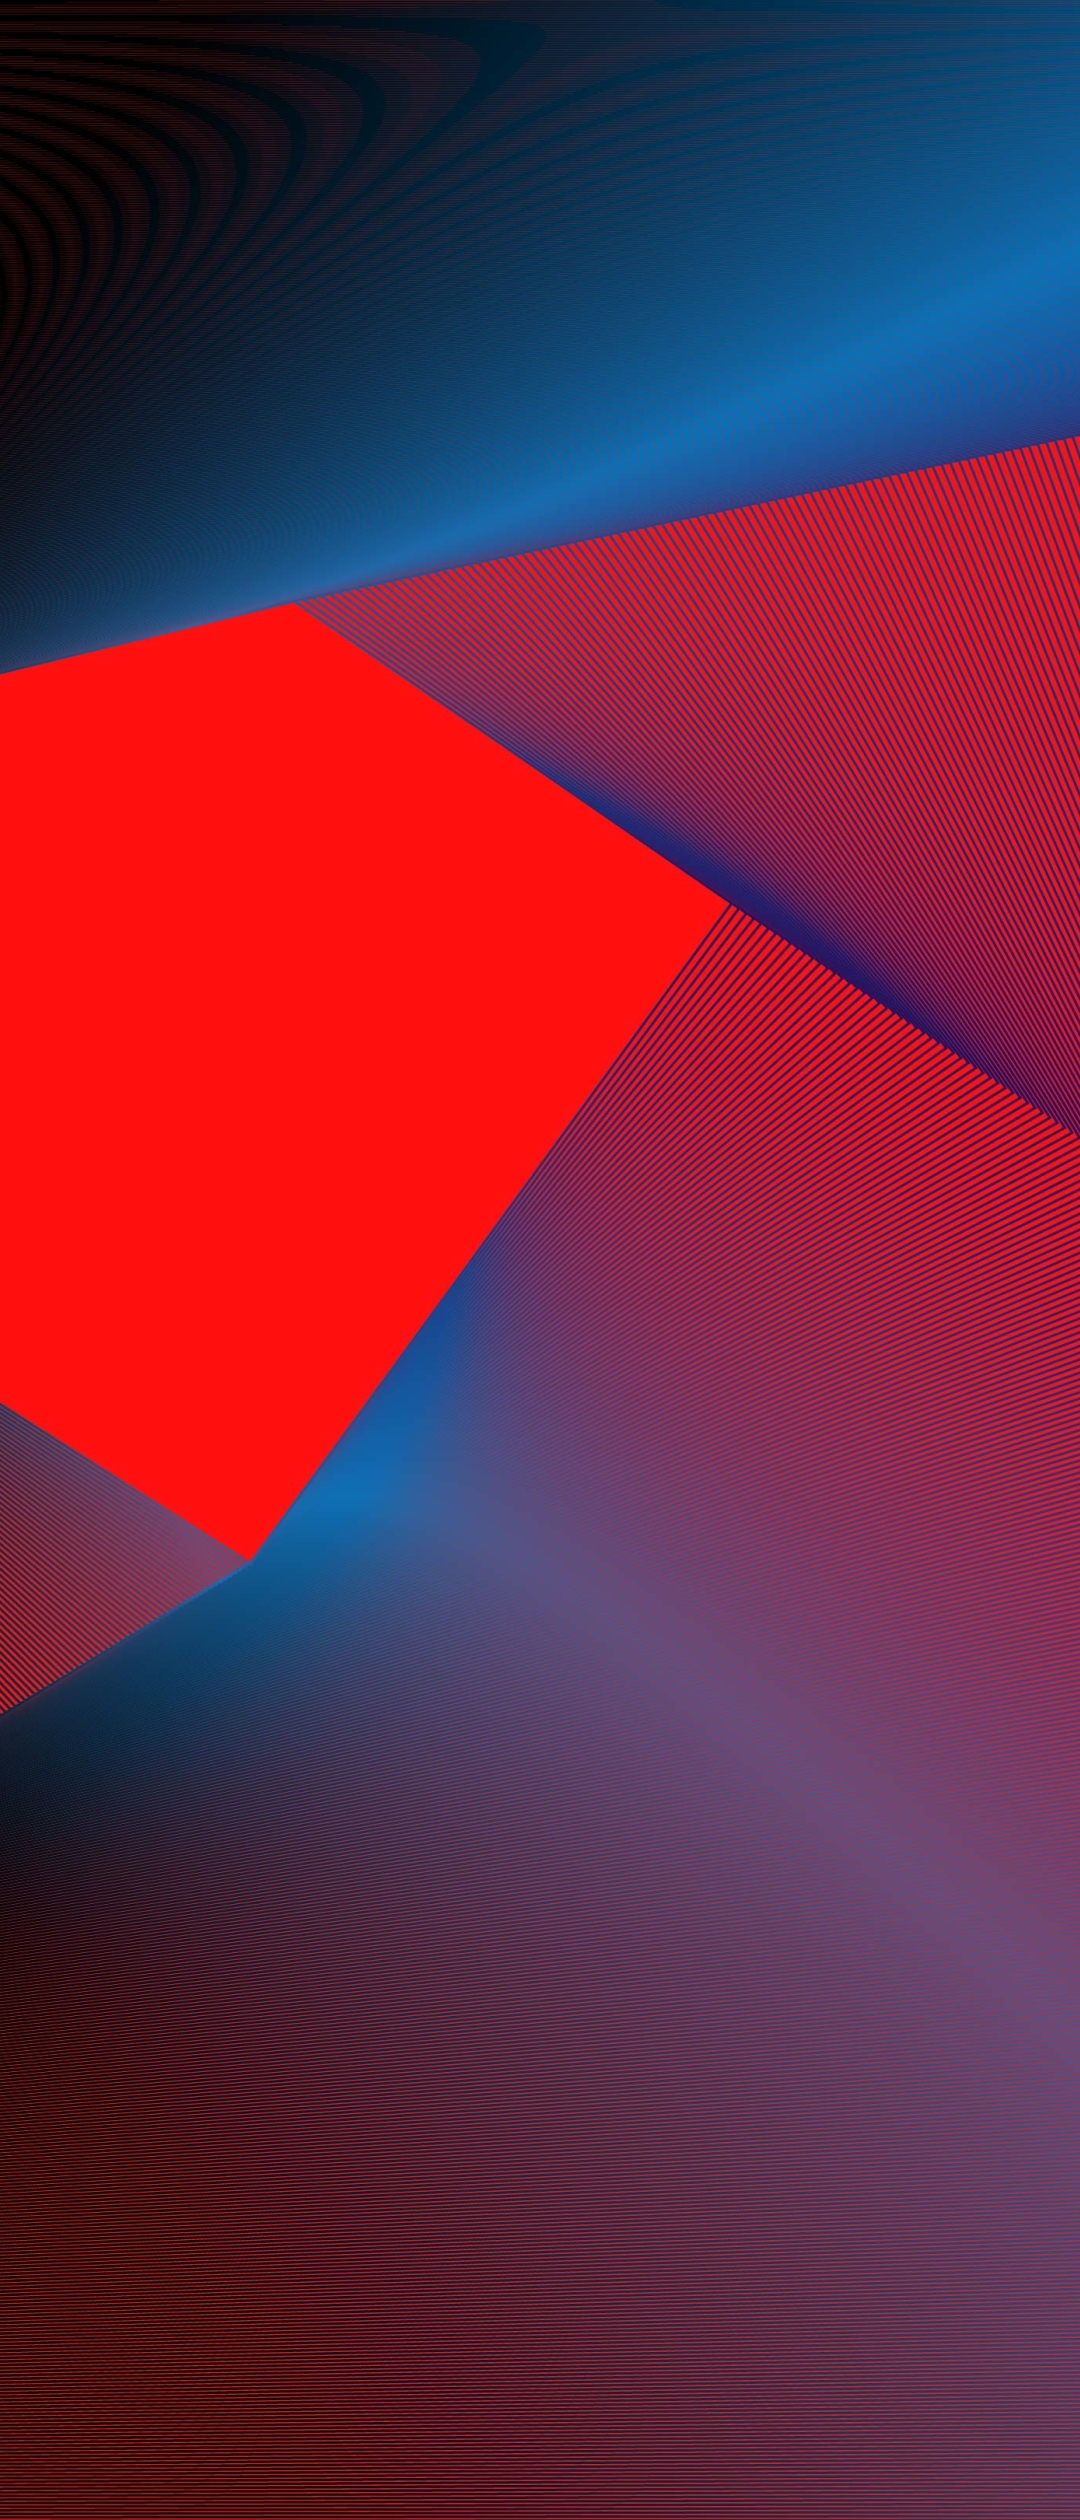 1080x2520 5k Abstract Colorful Lines 1080x2520 Resolution Wallpaper Hd